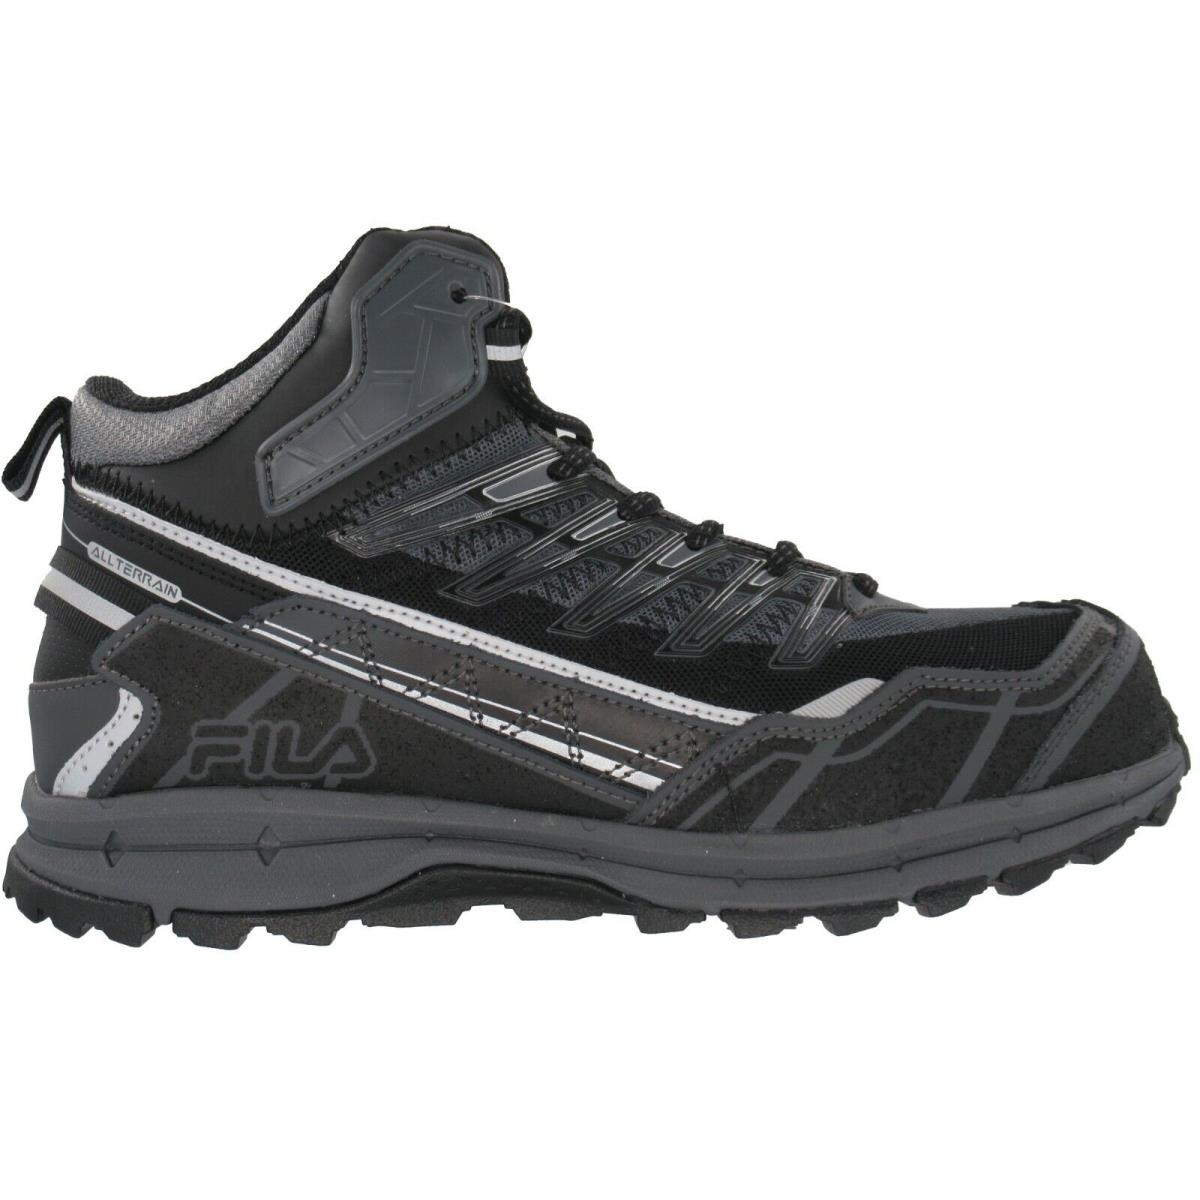 Fila Men`s Hail Storm 3 Mid CT Composite Safety Toe Work Sneaker Boots - Charcoal, Black, Silver